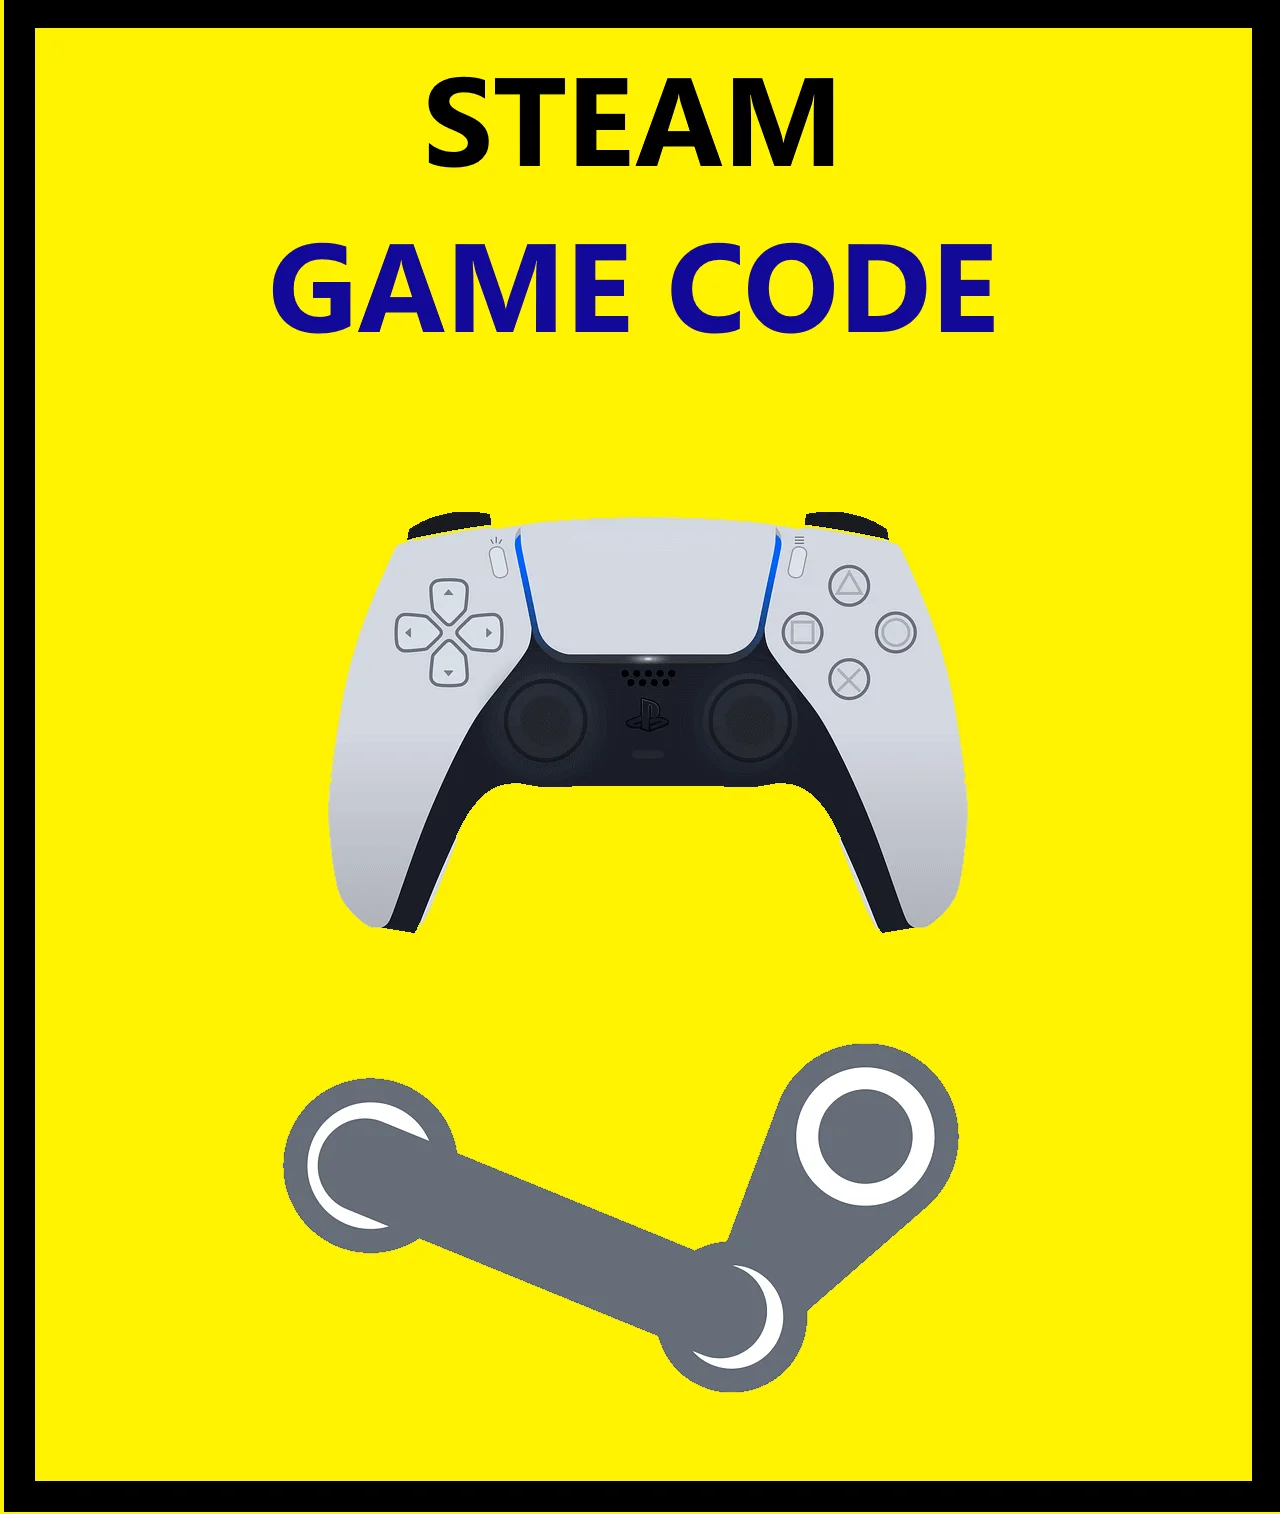 free steam gift card giveaway